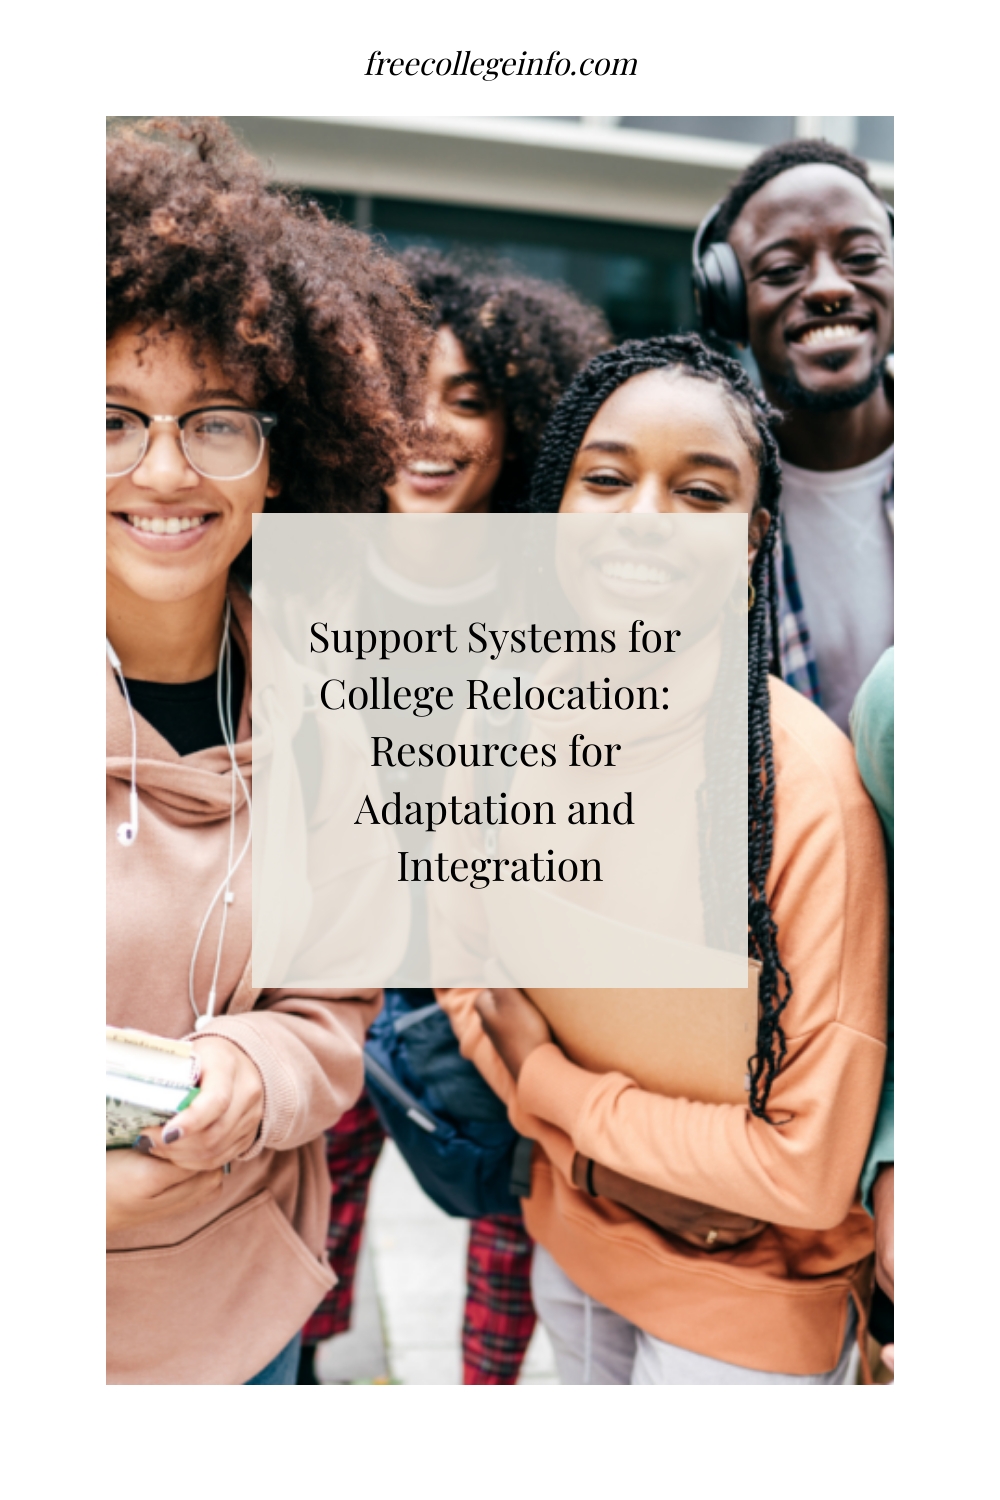 Support Systems for College Relocation: Resources for Adaptation and Integration